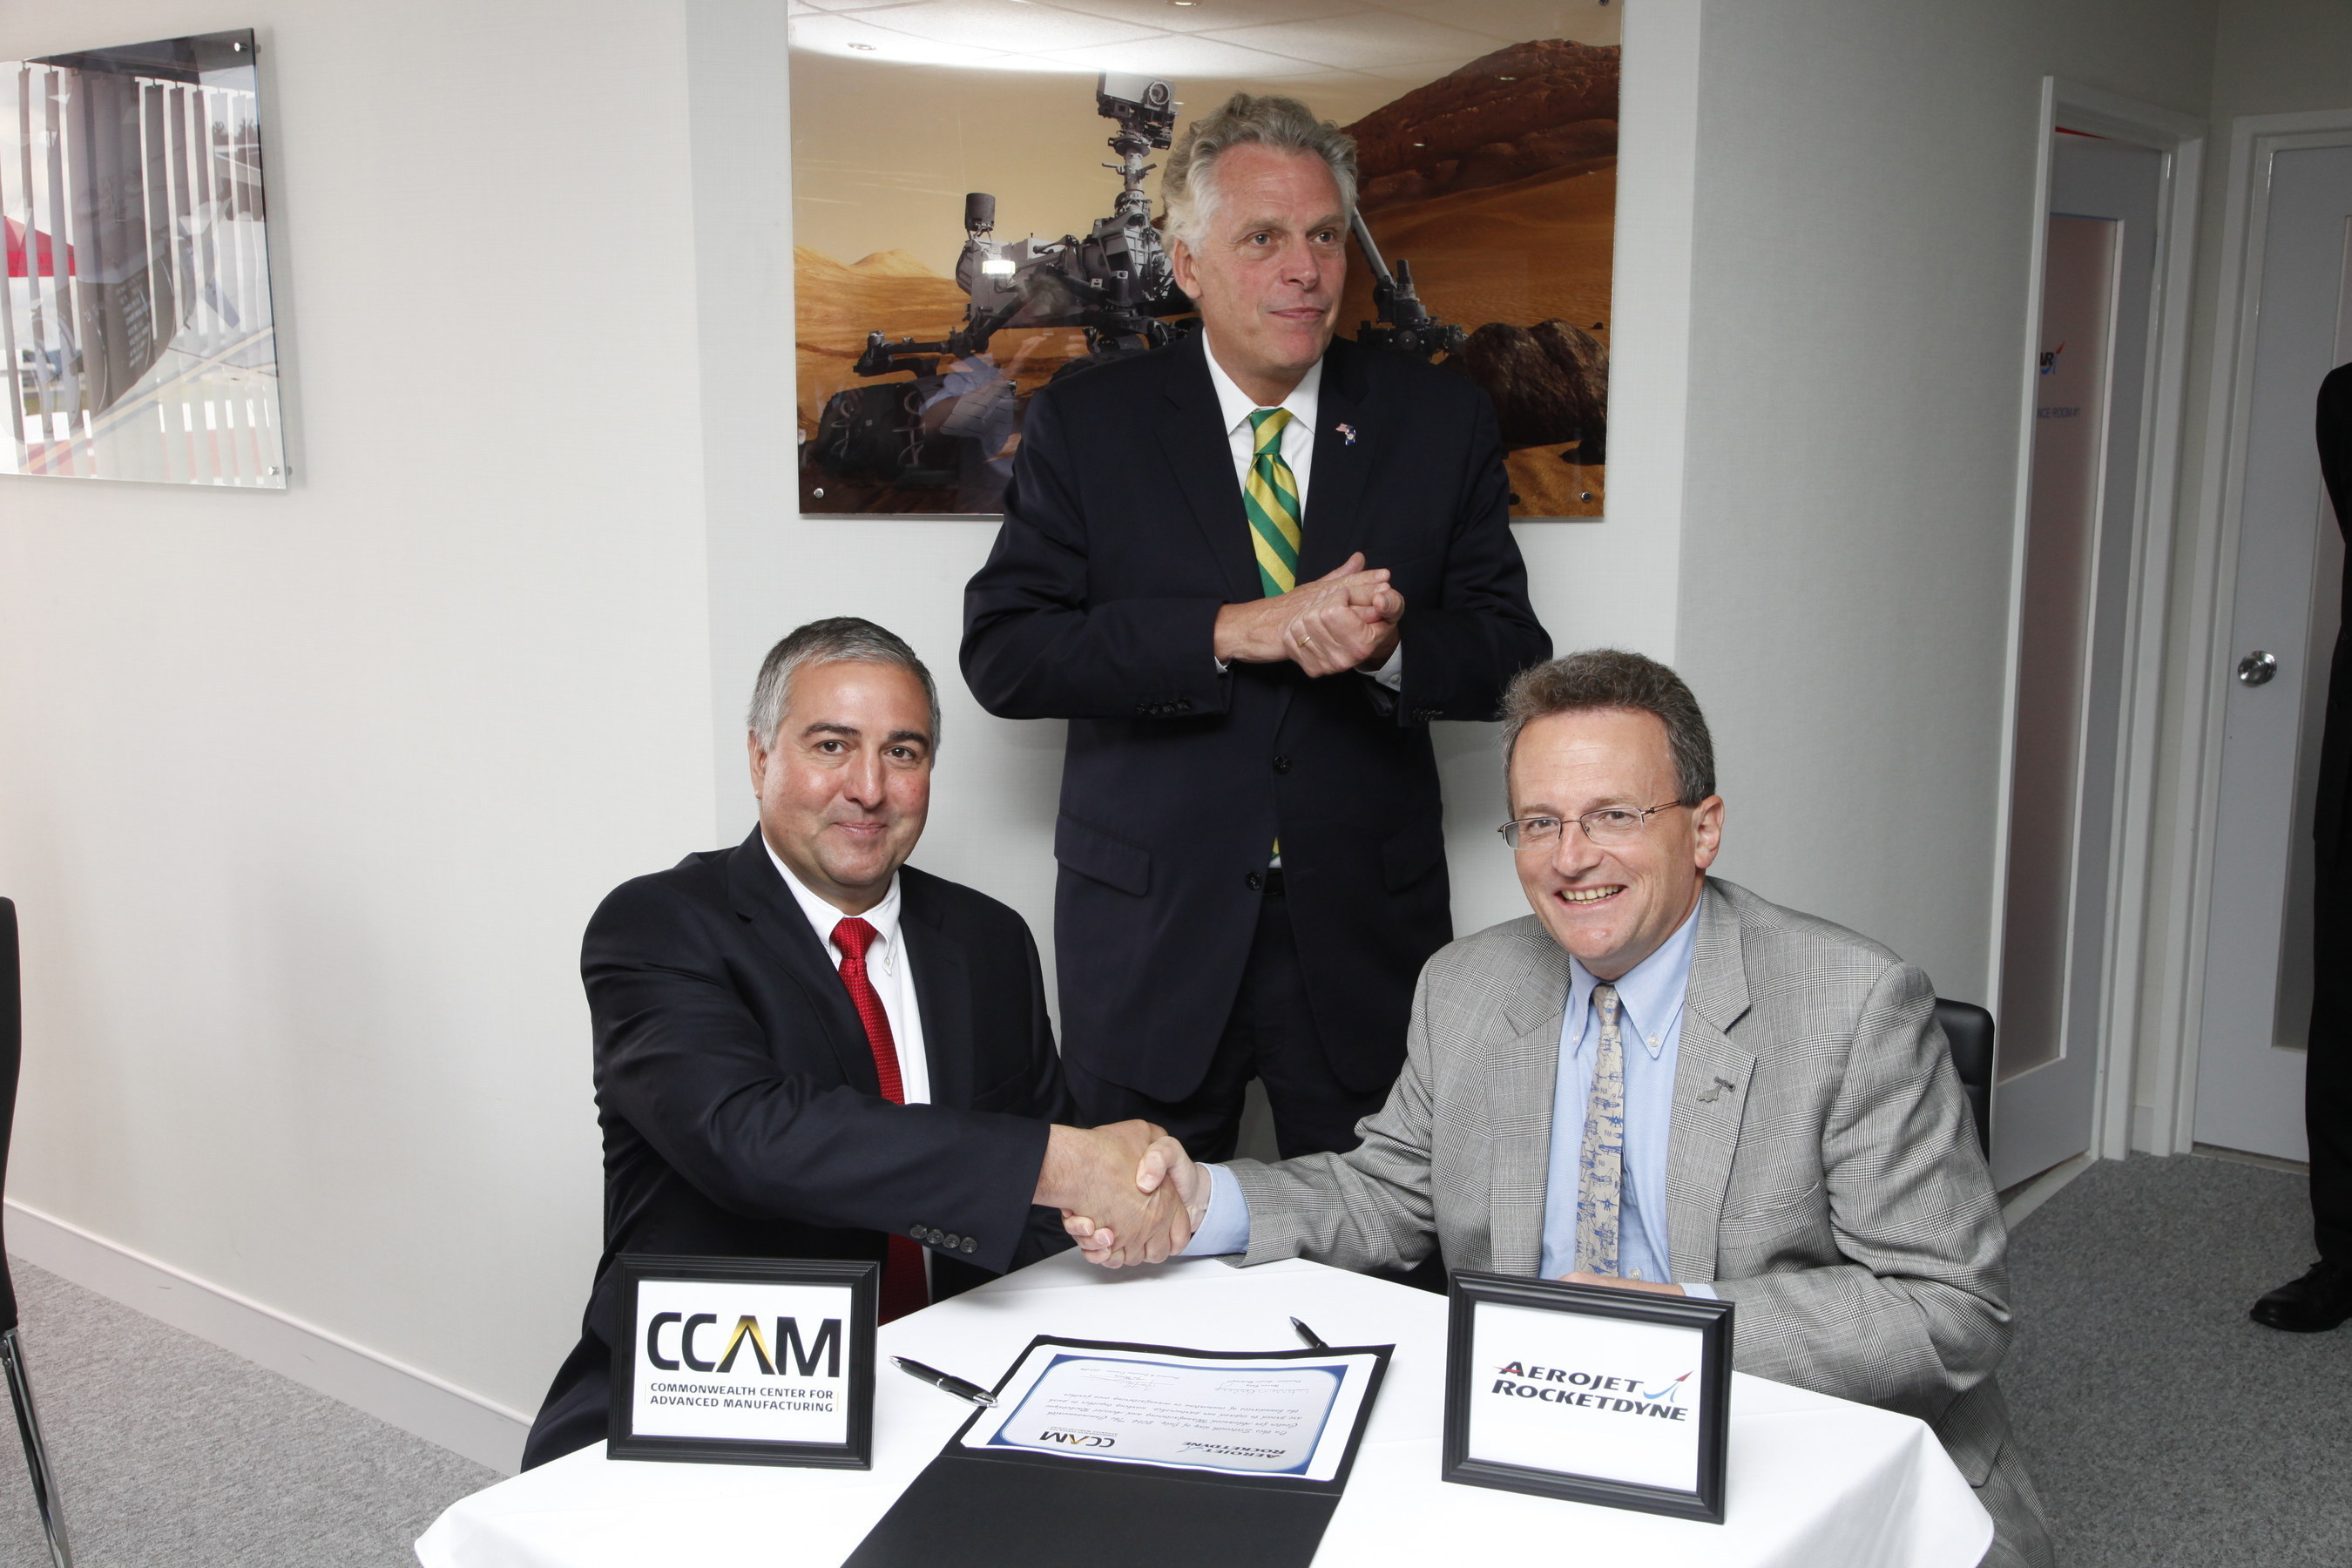 Virginia Governor Terry McAuliffe (back) oversees the agreement signed by Commonwealth Center for Advanced Manufacturing (CCAM) President & Executive Director Joseph Moody (seated, left) and Aerojet Rocketdyne President Warren Boley (right). (PRNewsFoto/CCAM)